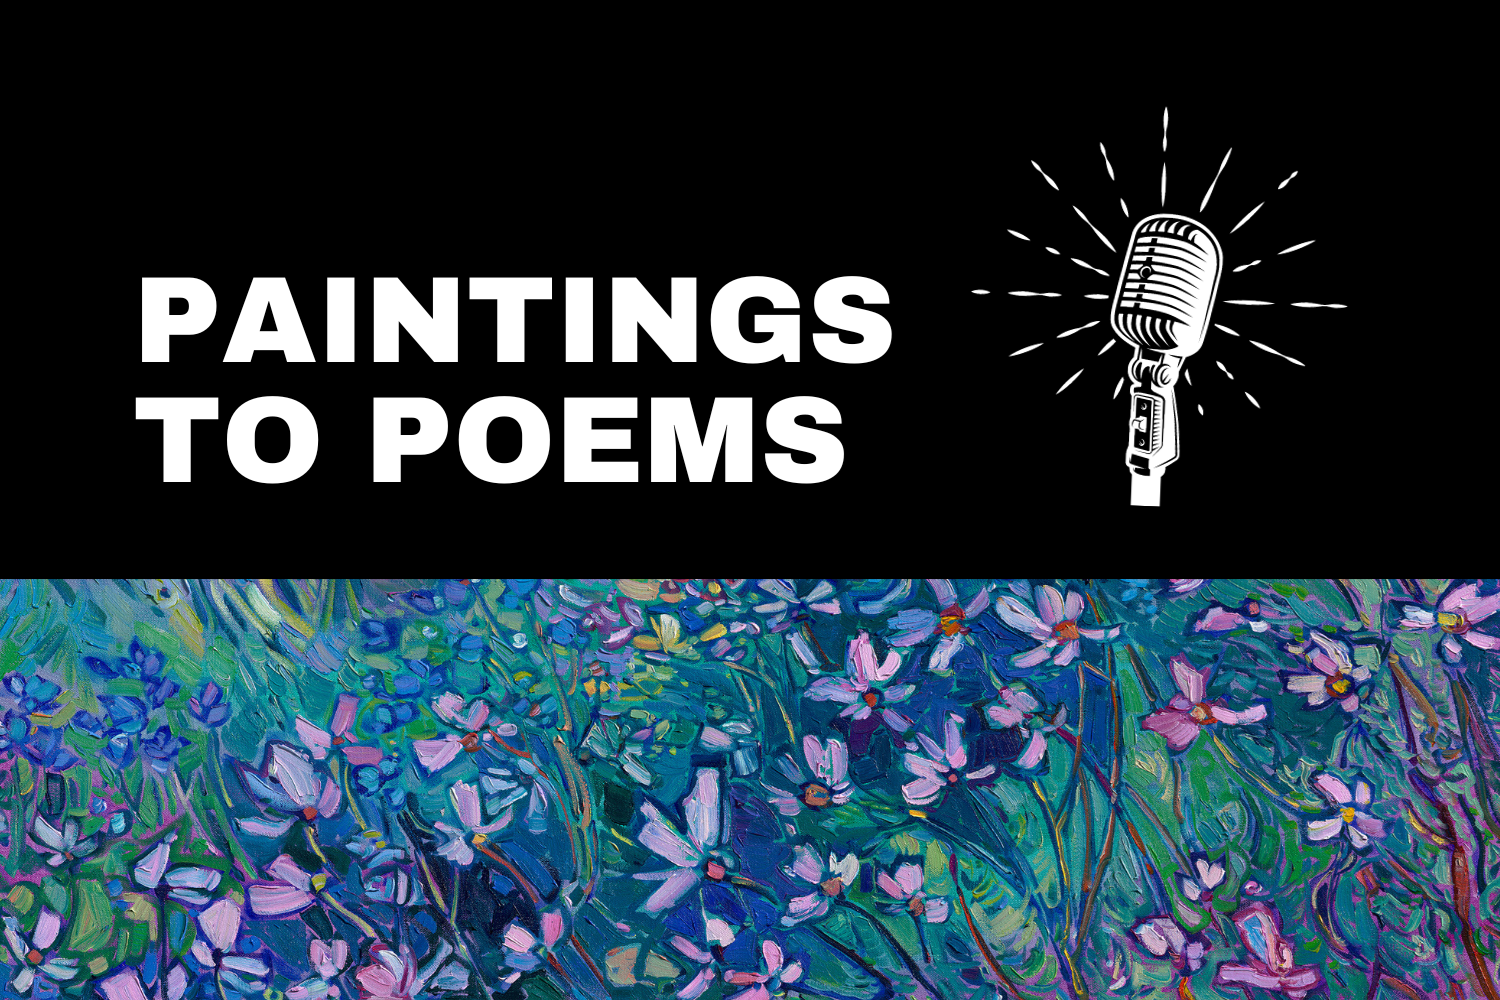 Paintings to Poems - Organized by the McMinnville Public Library